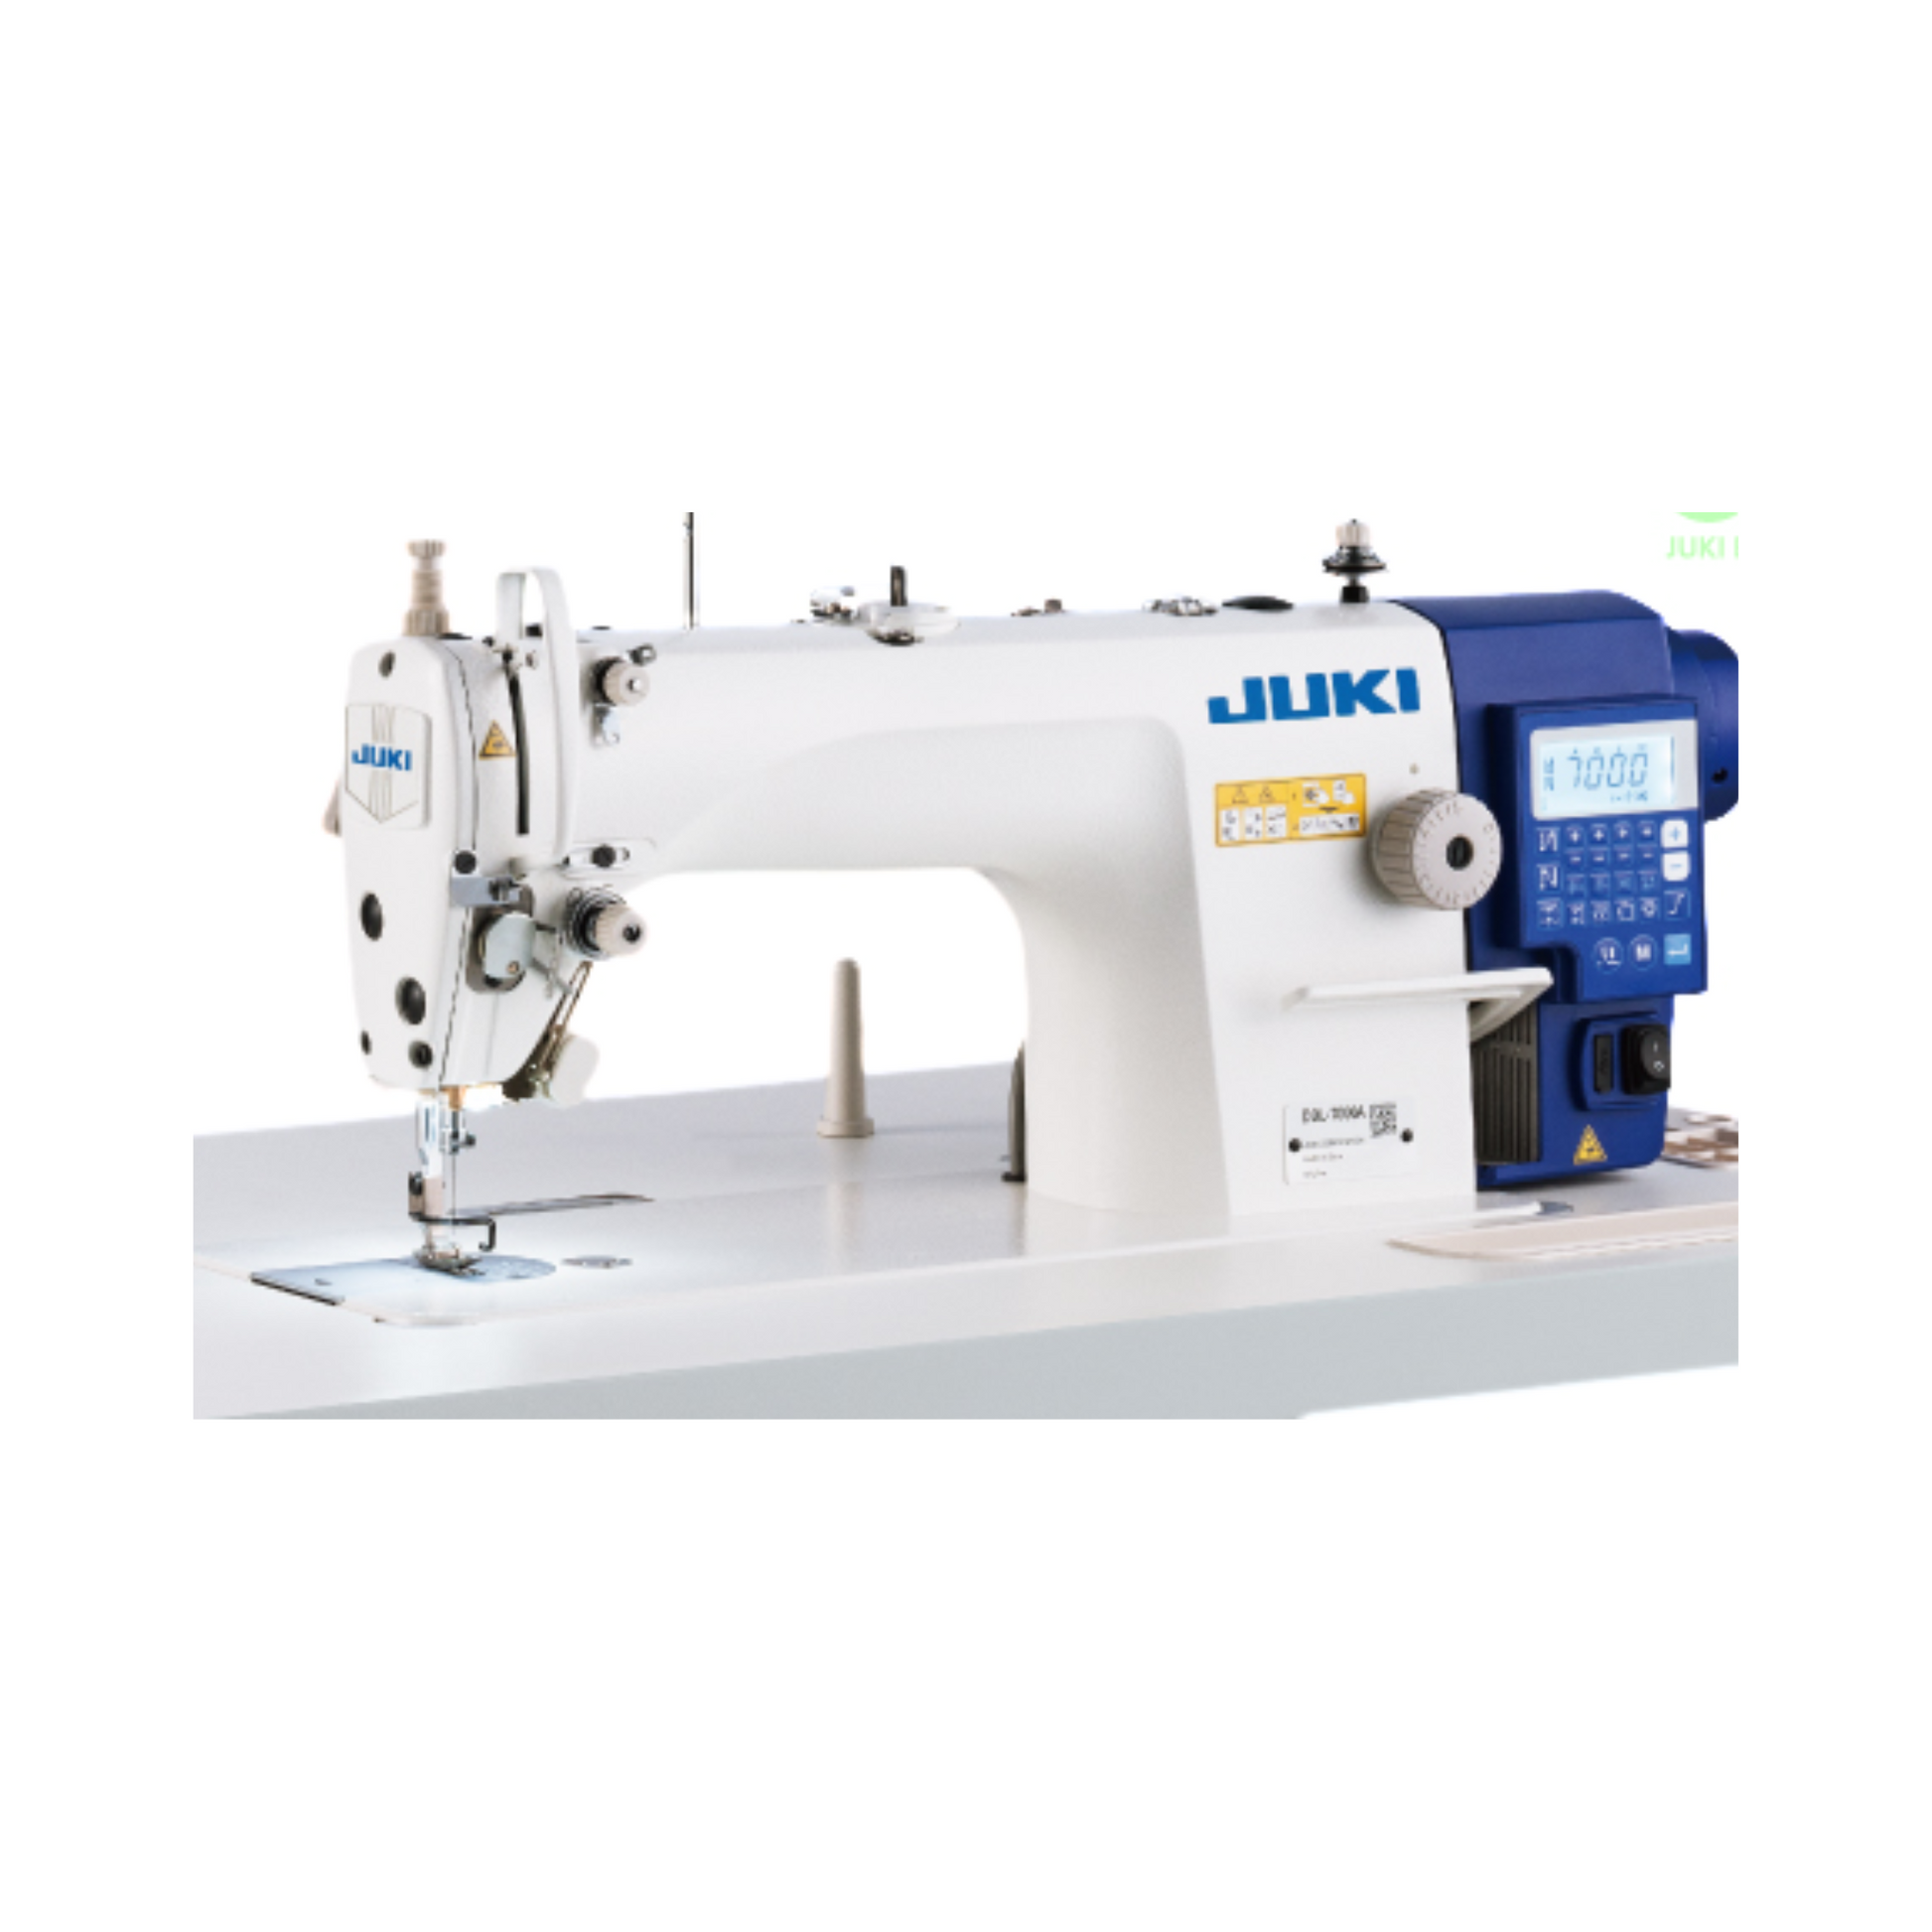 Juki DDL-7000A-7 1-needle, lockstitch machine with automatic functions - Sewing machine - Multi color - Front view